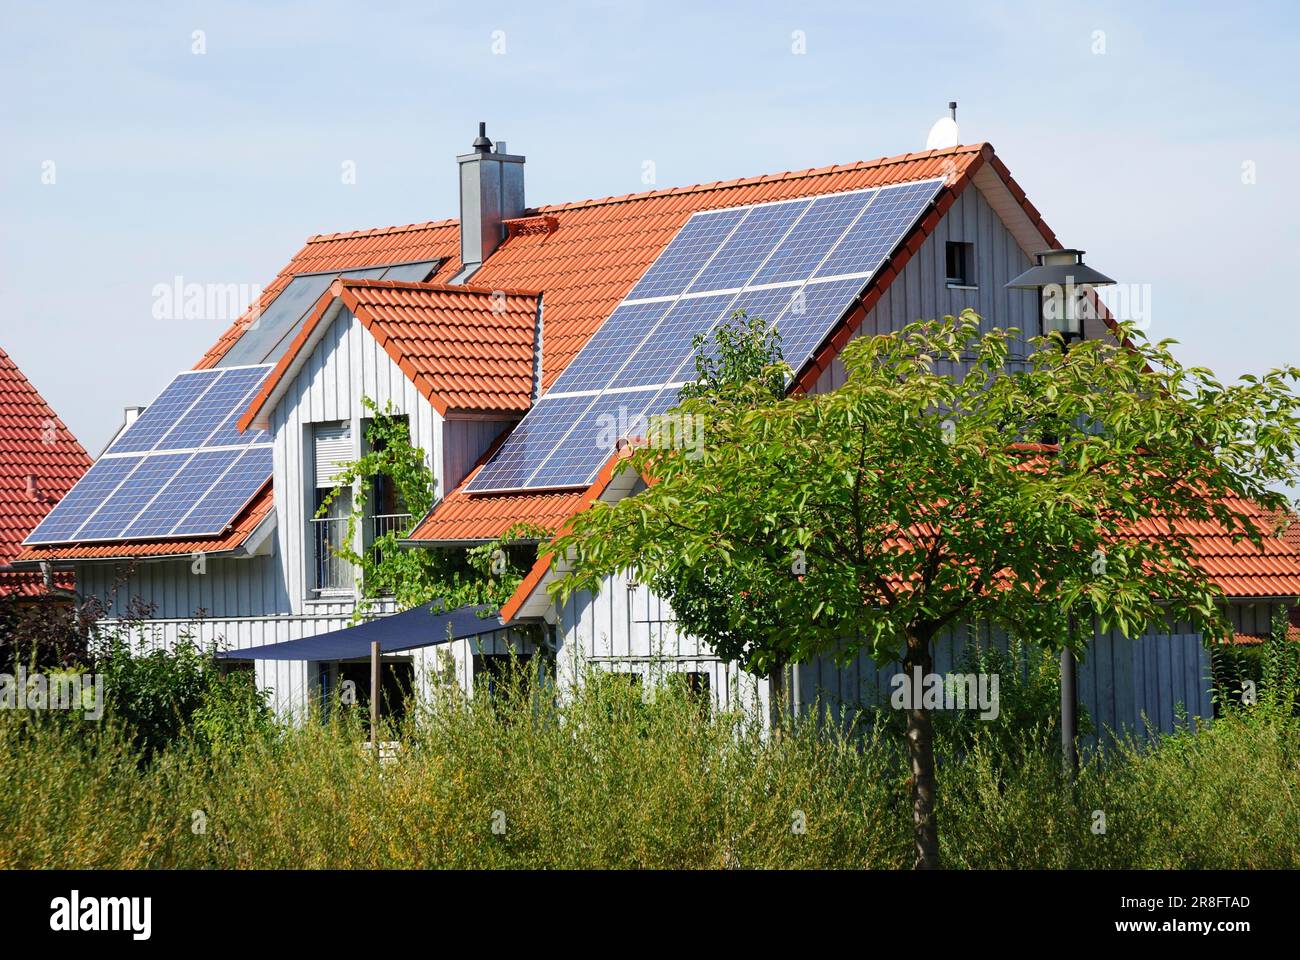 Solar panels on the roof of a house Stock Photo